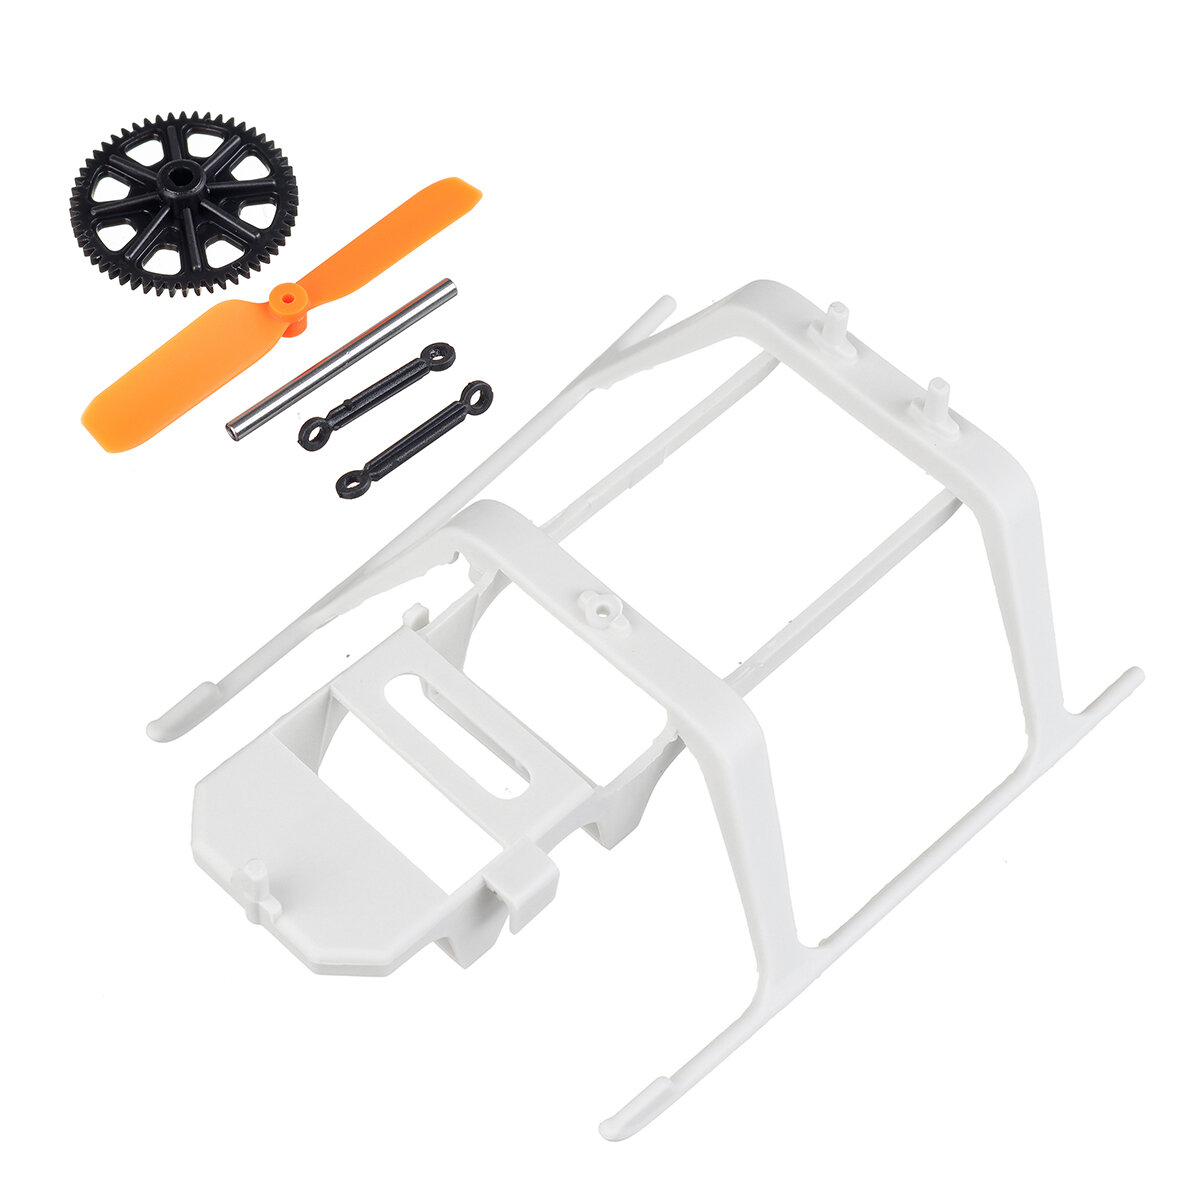 

Eachine E160 RC Helicopter Parts Package Main Gear Landing Skid Tail Blade Upper Linkage Rod Set Main Shaft